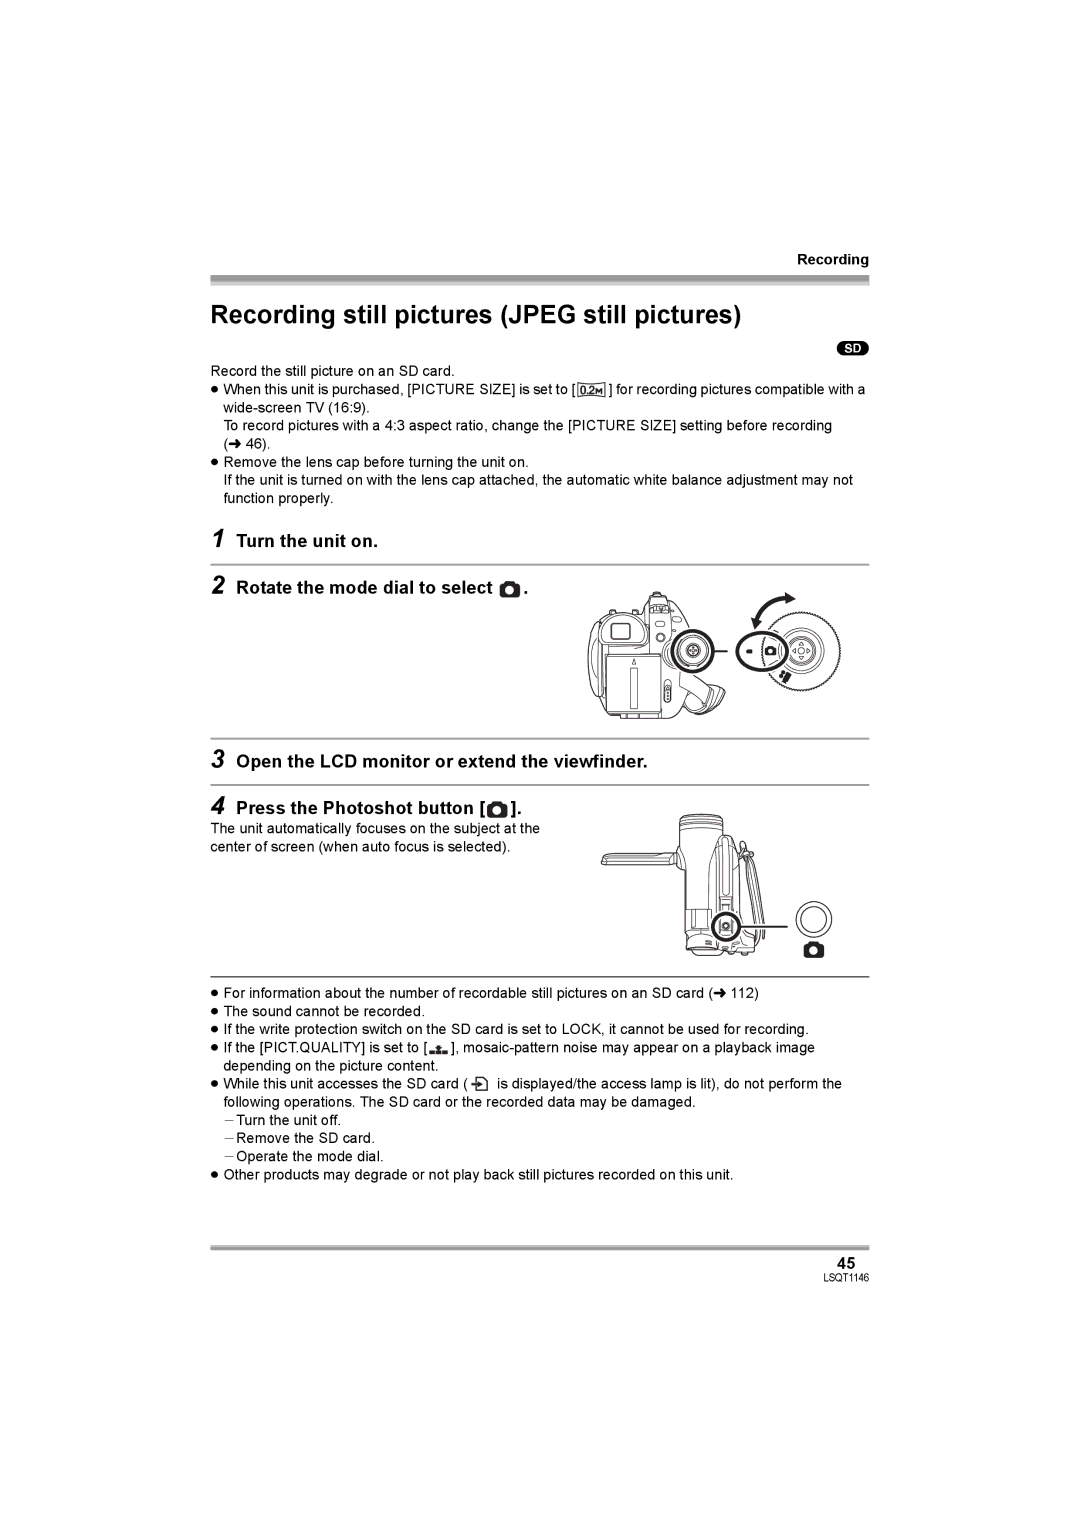 Panasonic VDR-D220 operating instructions Recording still pictures Jpeg still pictures 